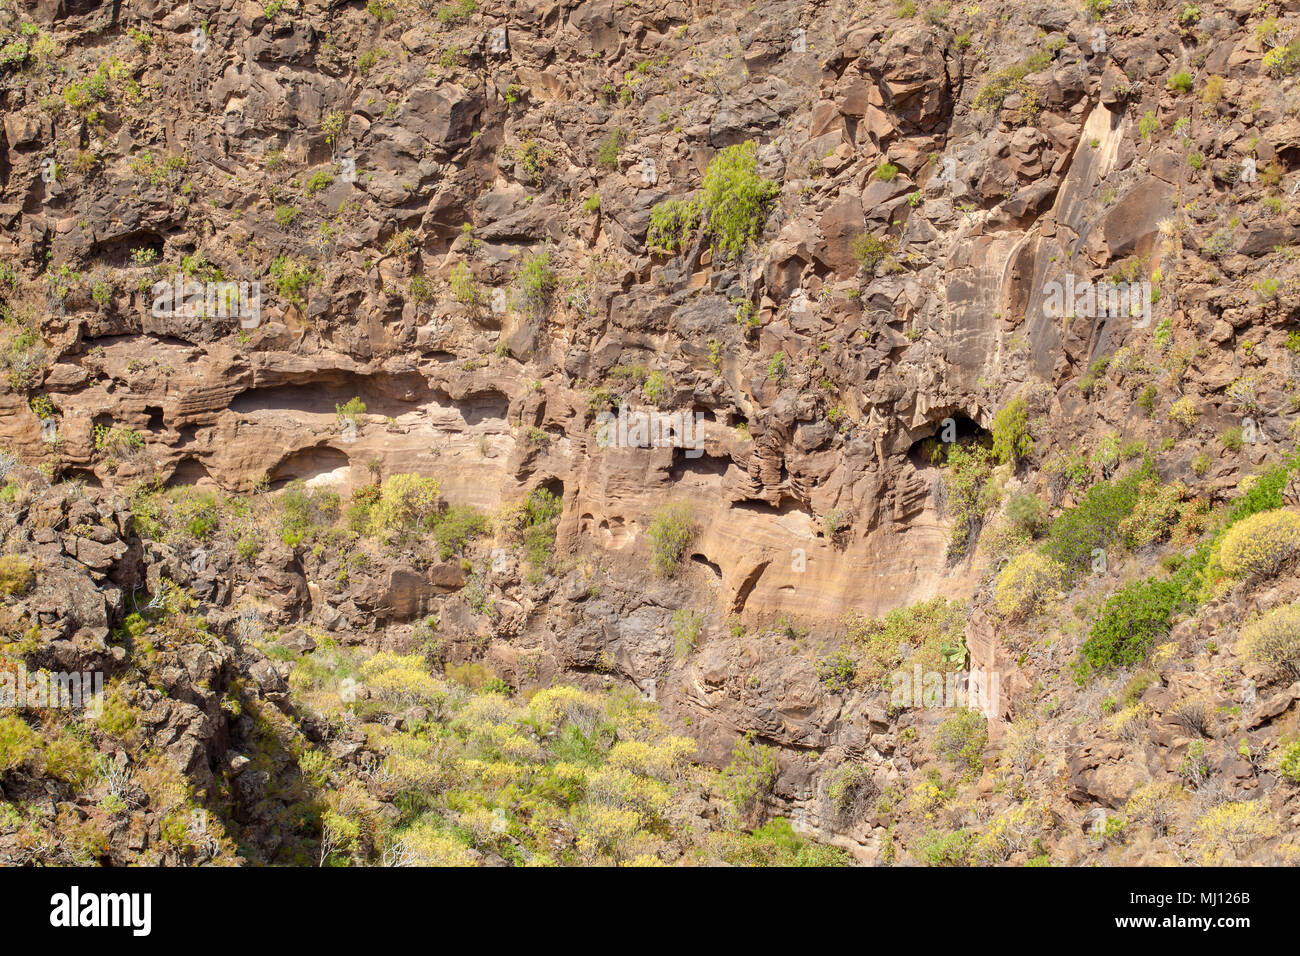 Gran Canaria, Barranco de Las Vacas ravine between Aguimes and Temisas villages, small caves and grottoes in the wall of the ravine Stock Photo